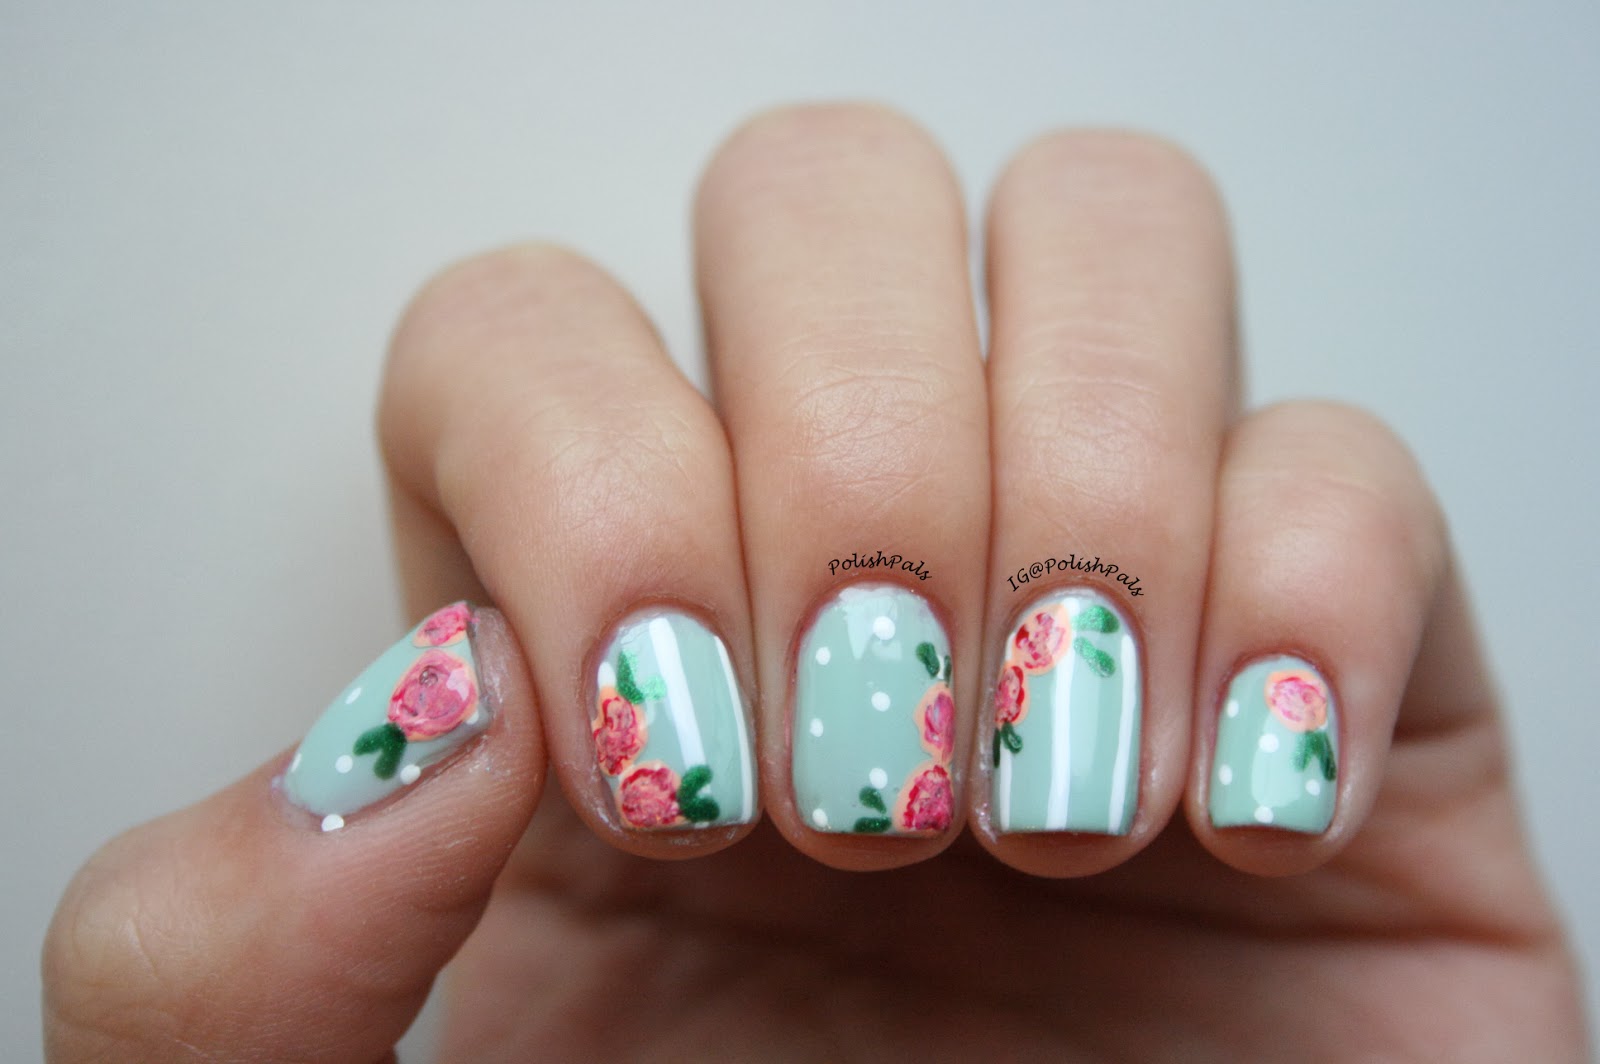 Polish Pals: Your Typical Mint Mani